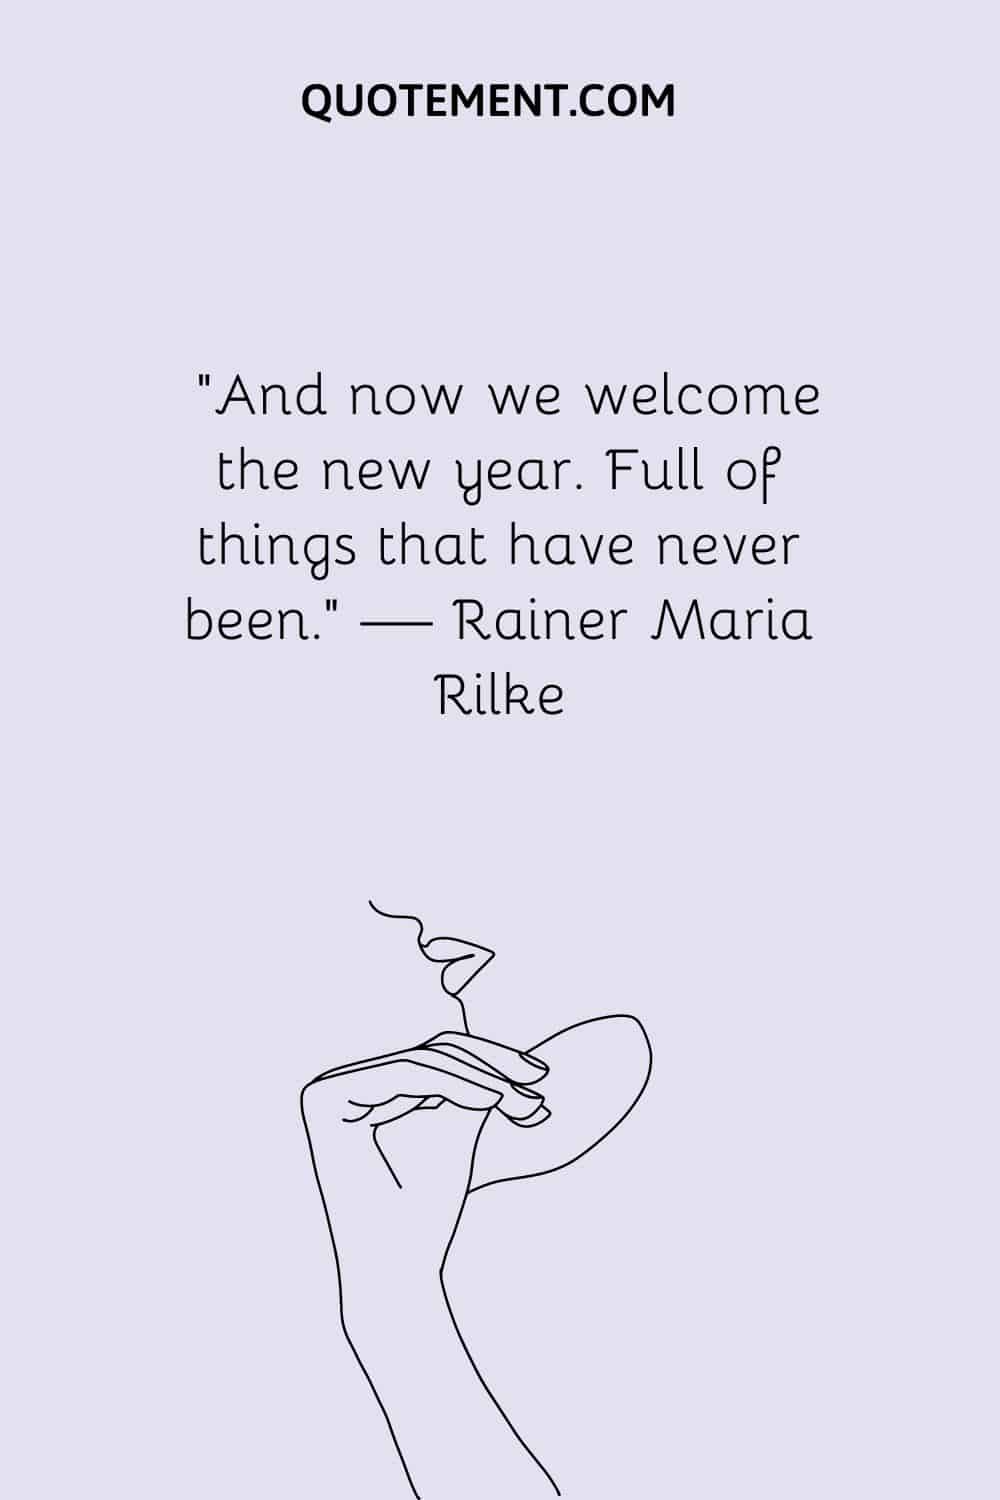 And now we welcome the new year. Full of things that have never been